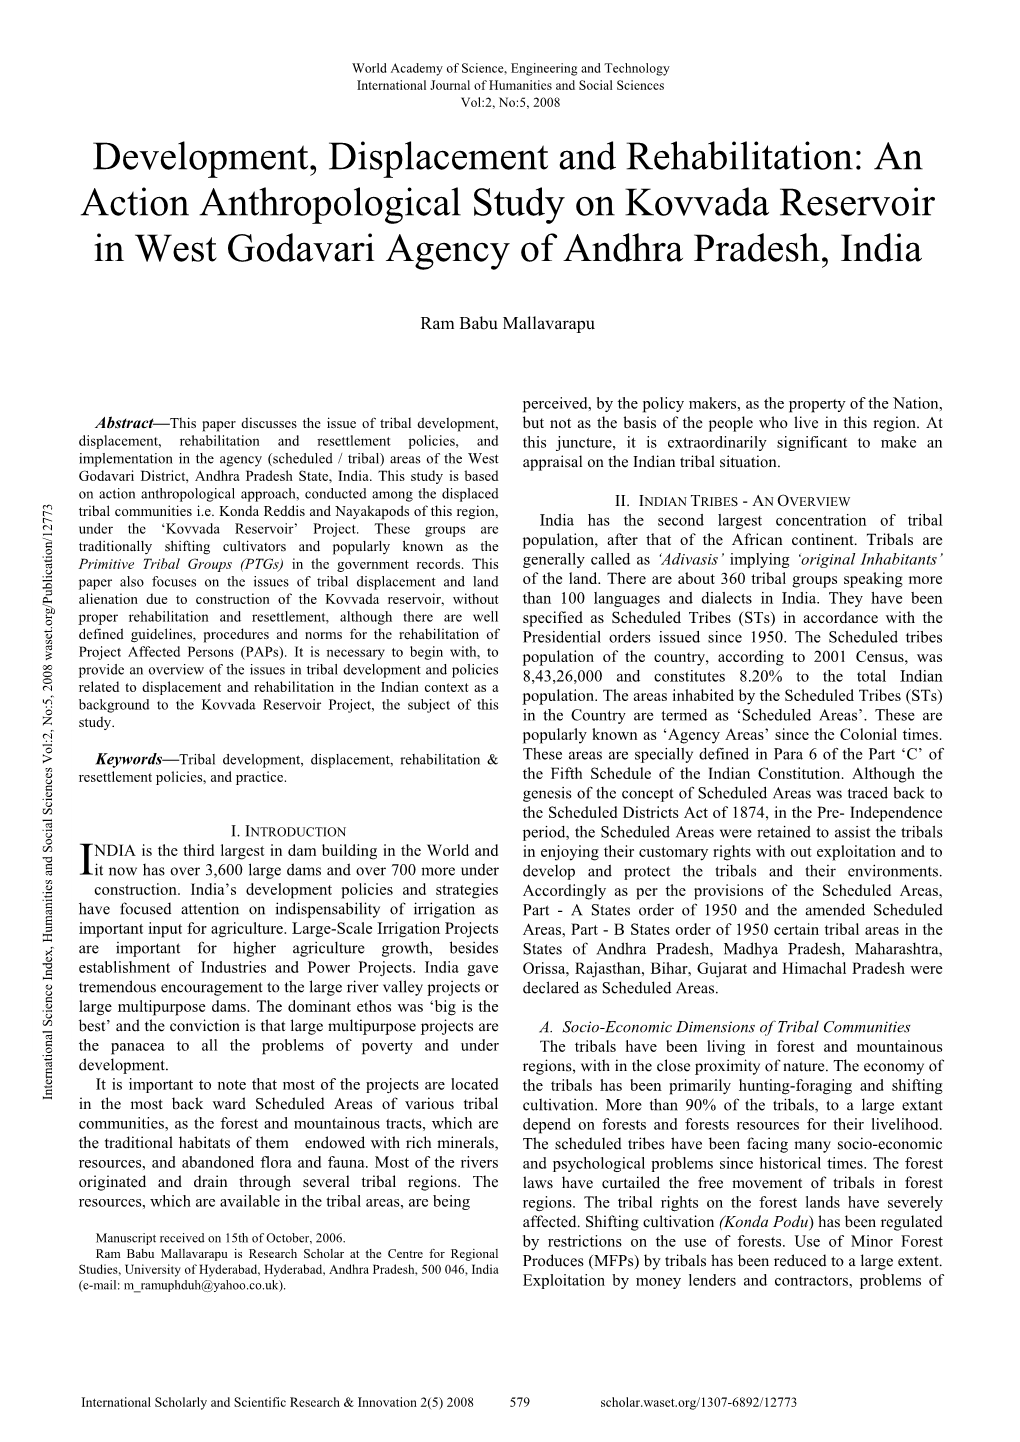 Development, Displacement and Rehabilitation: an Action Anthropological Study on Kovvada Reservoir in West Godavari Agency of Andhra Pradesh, India